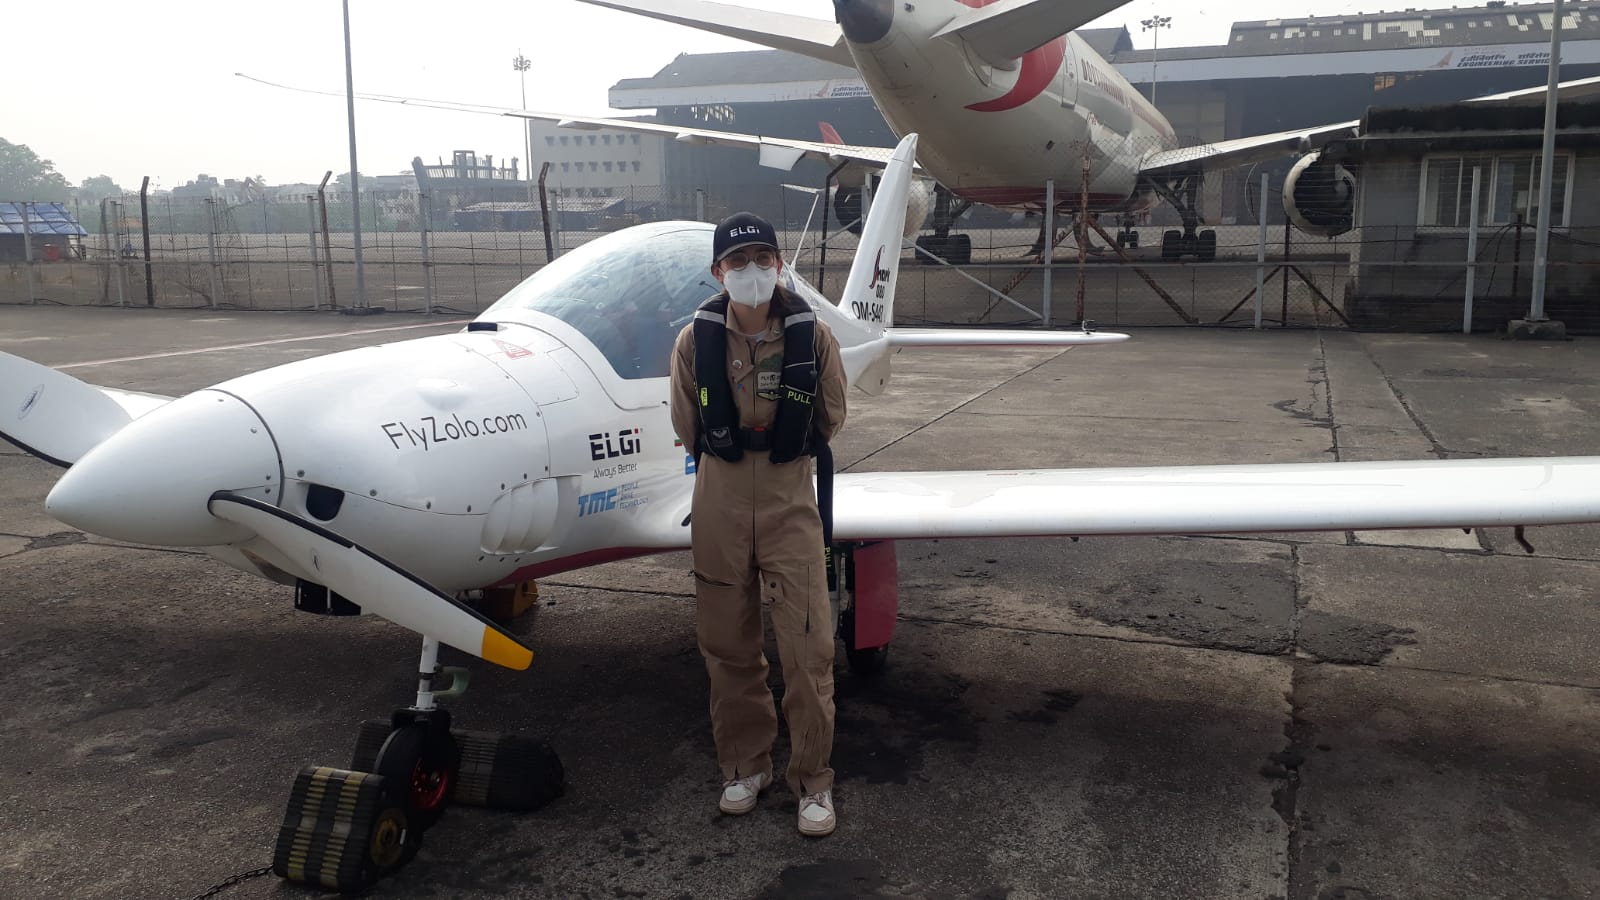 Mumbai International Airport - 19-year-old pilot who is attempting to be the youngest woman to fly solo around the world lands at Mumbai International Airport